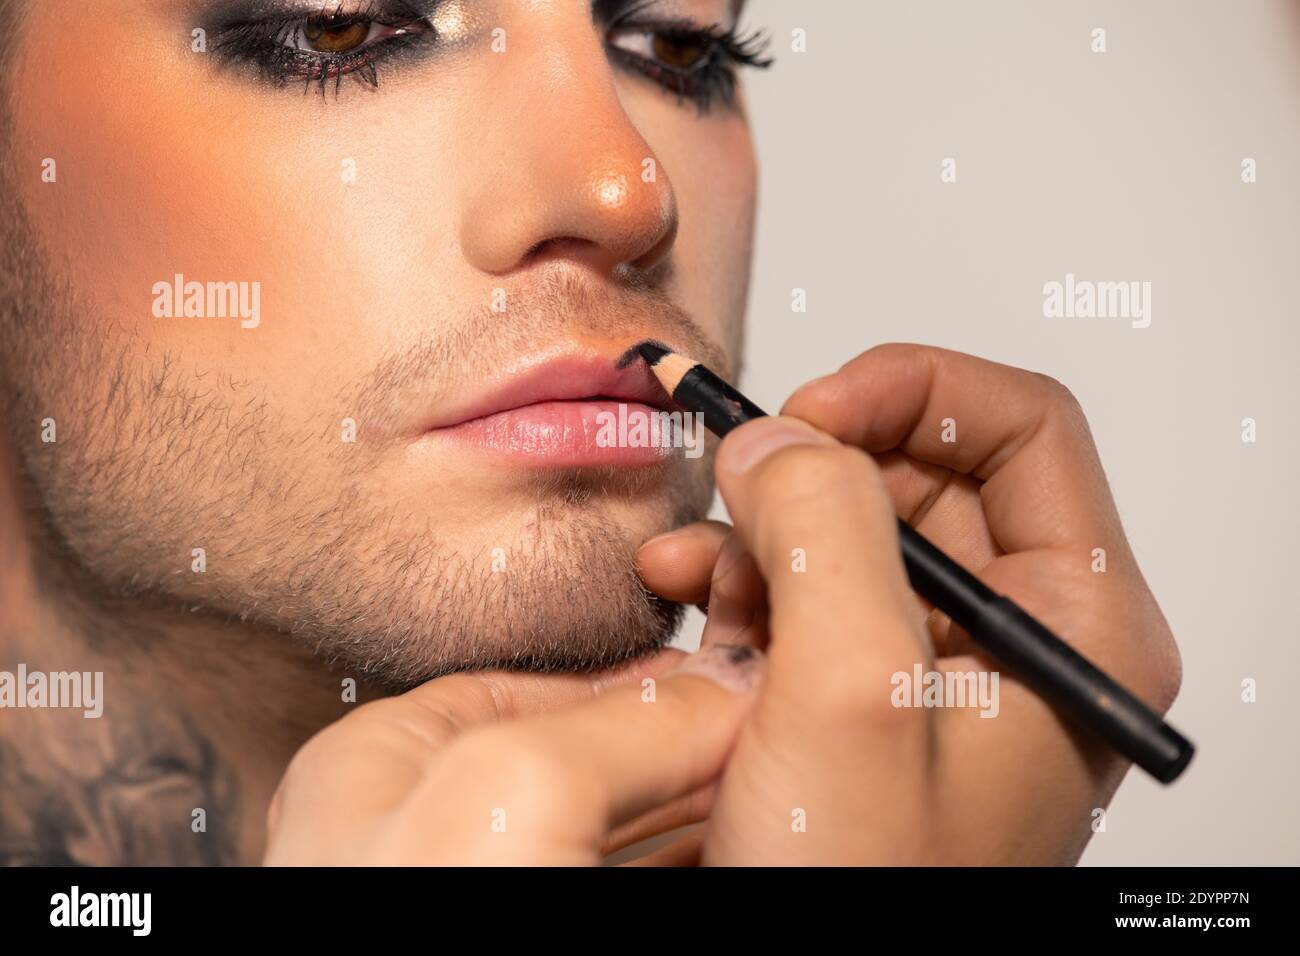 Hand of contemporary makeup artist with black kohl eye liner going to apply it on lips of male fashion model sitting in front of camera Stock Photo